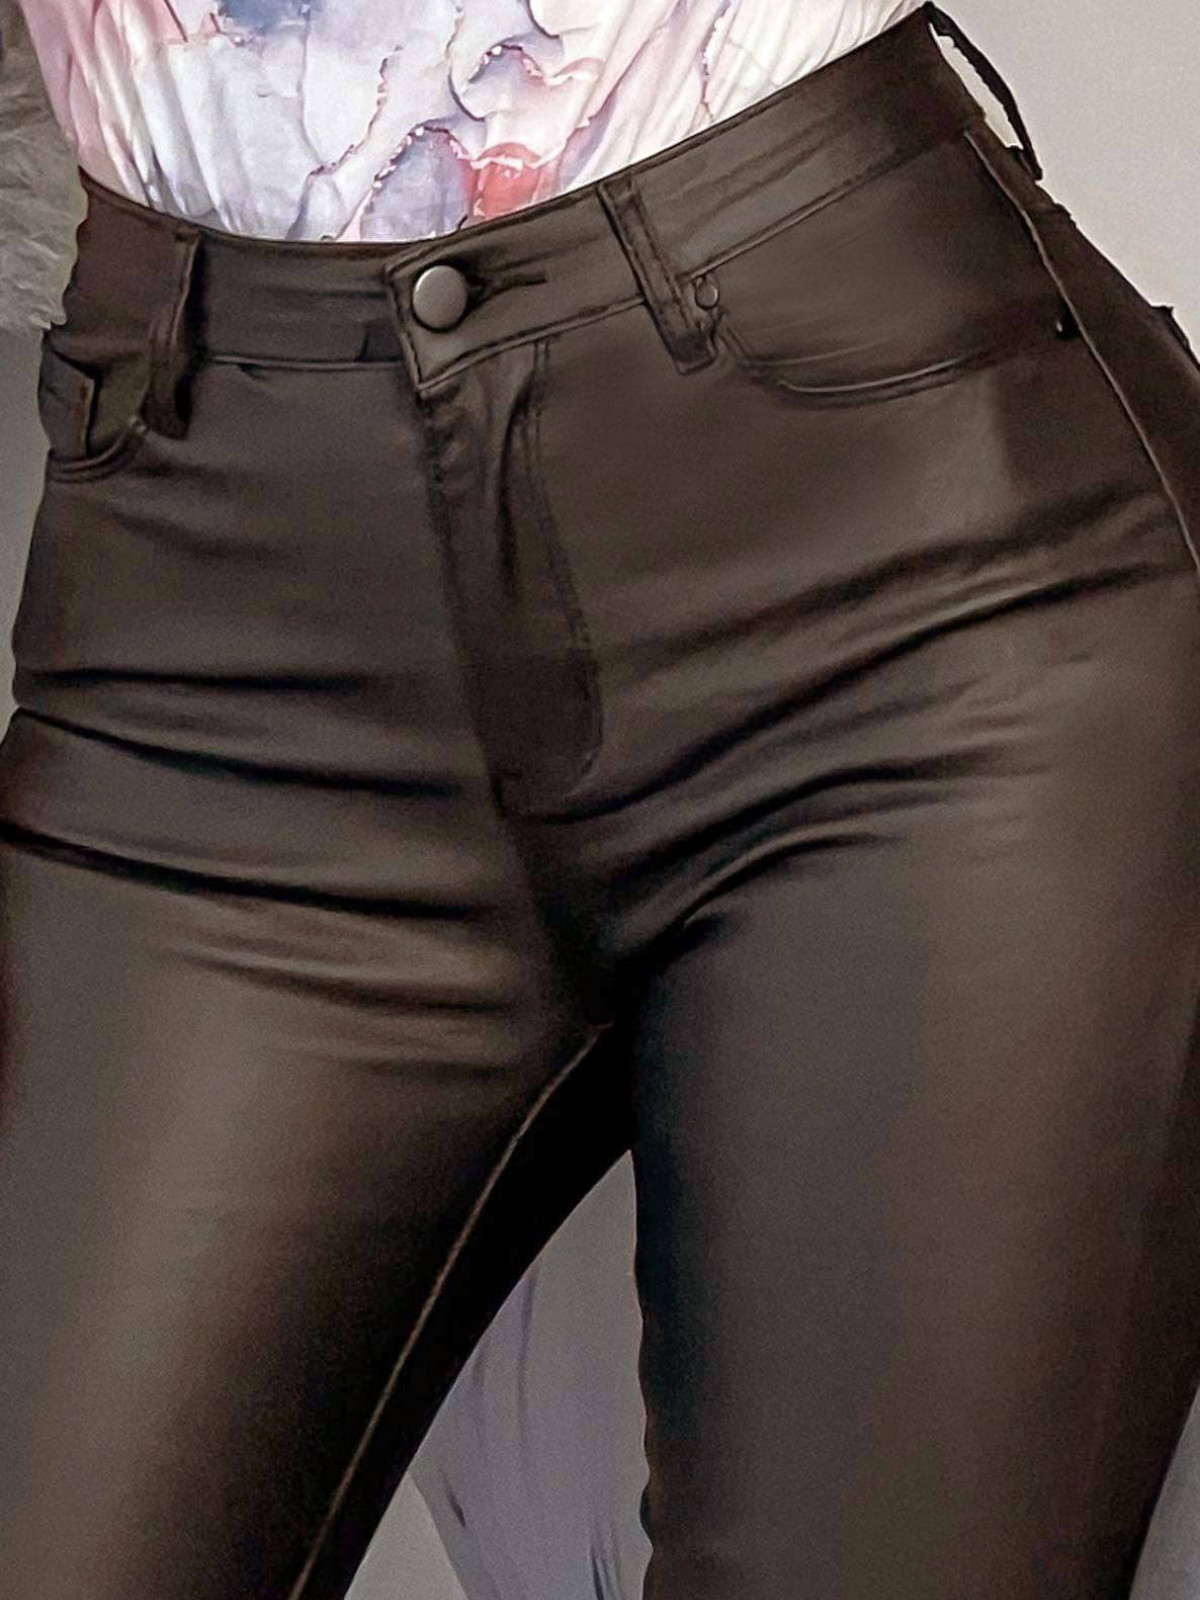 Trousers and leggings - Leatherette Dark Brown Pocket Detail Trousers Roxanne